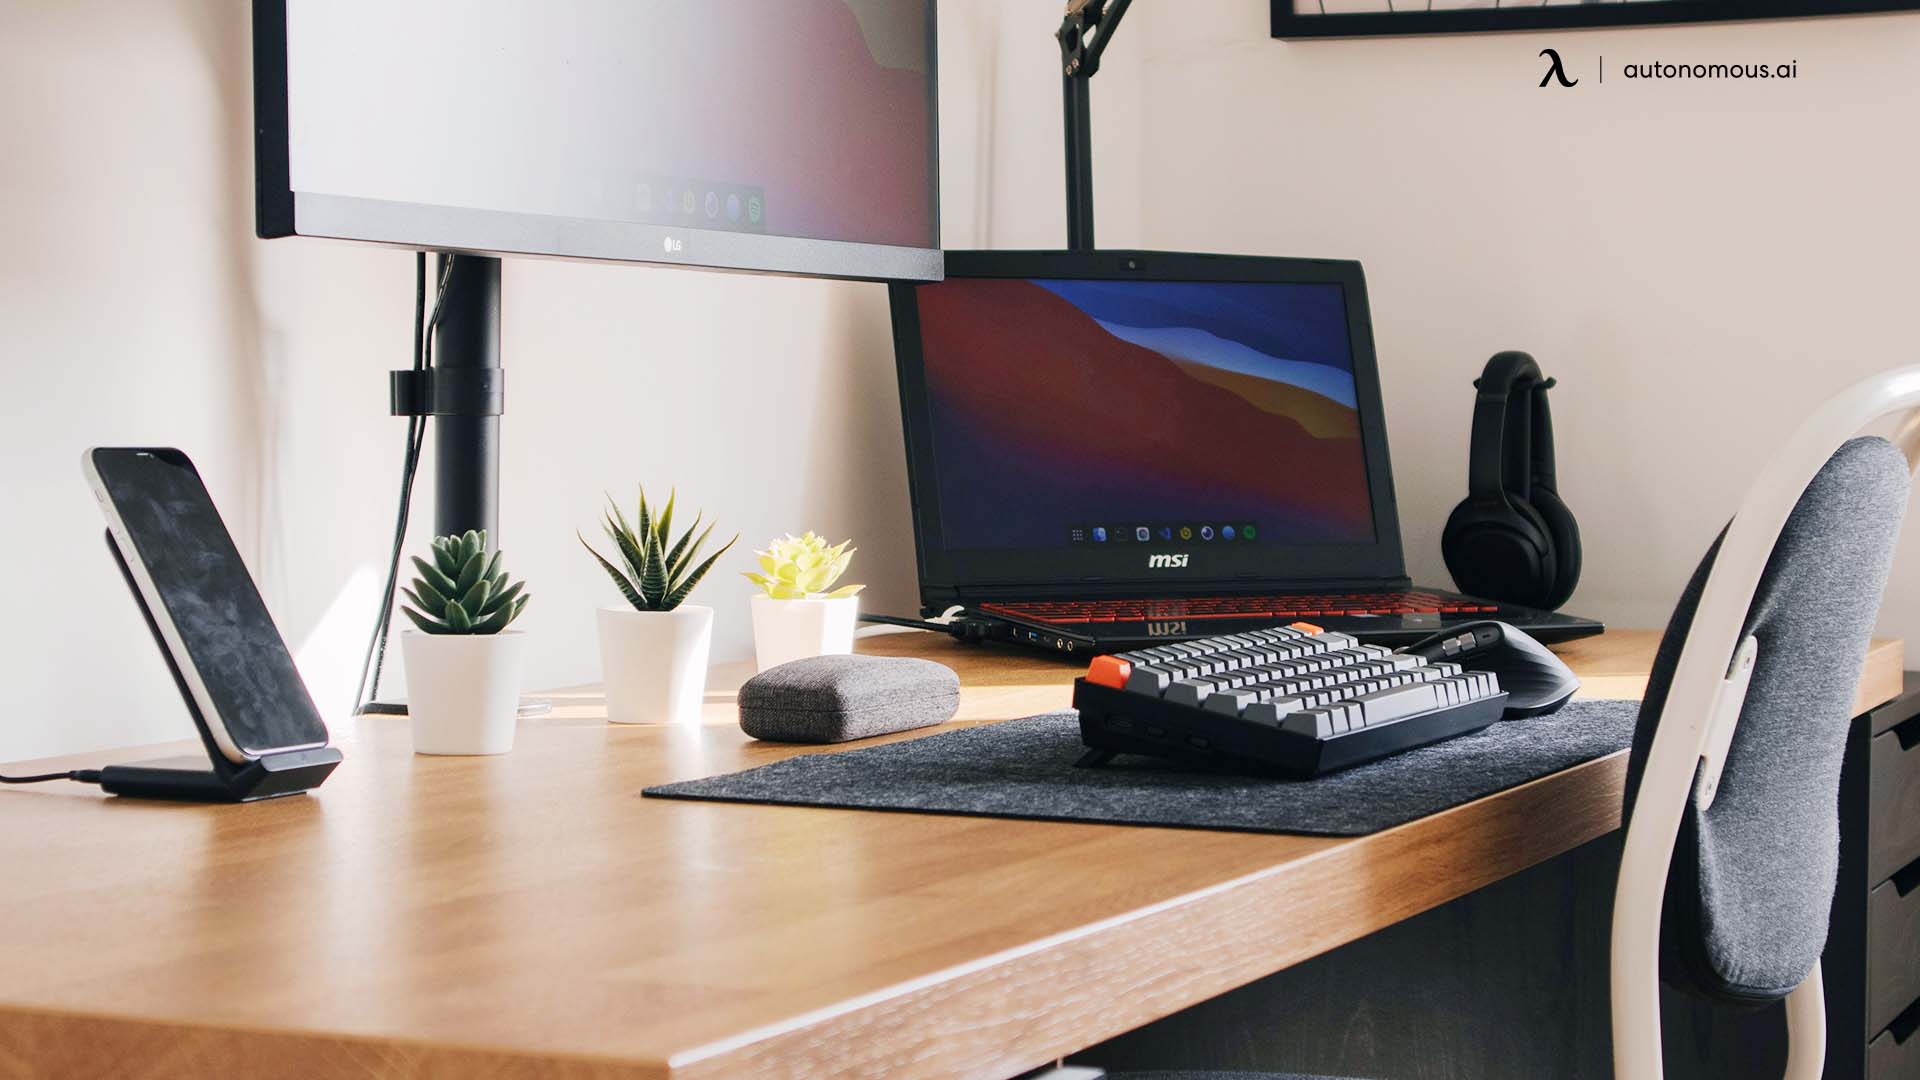 How to Make Over My Office Desk? 8 Easy Tips to Start Right away